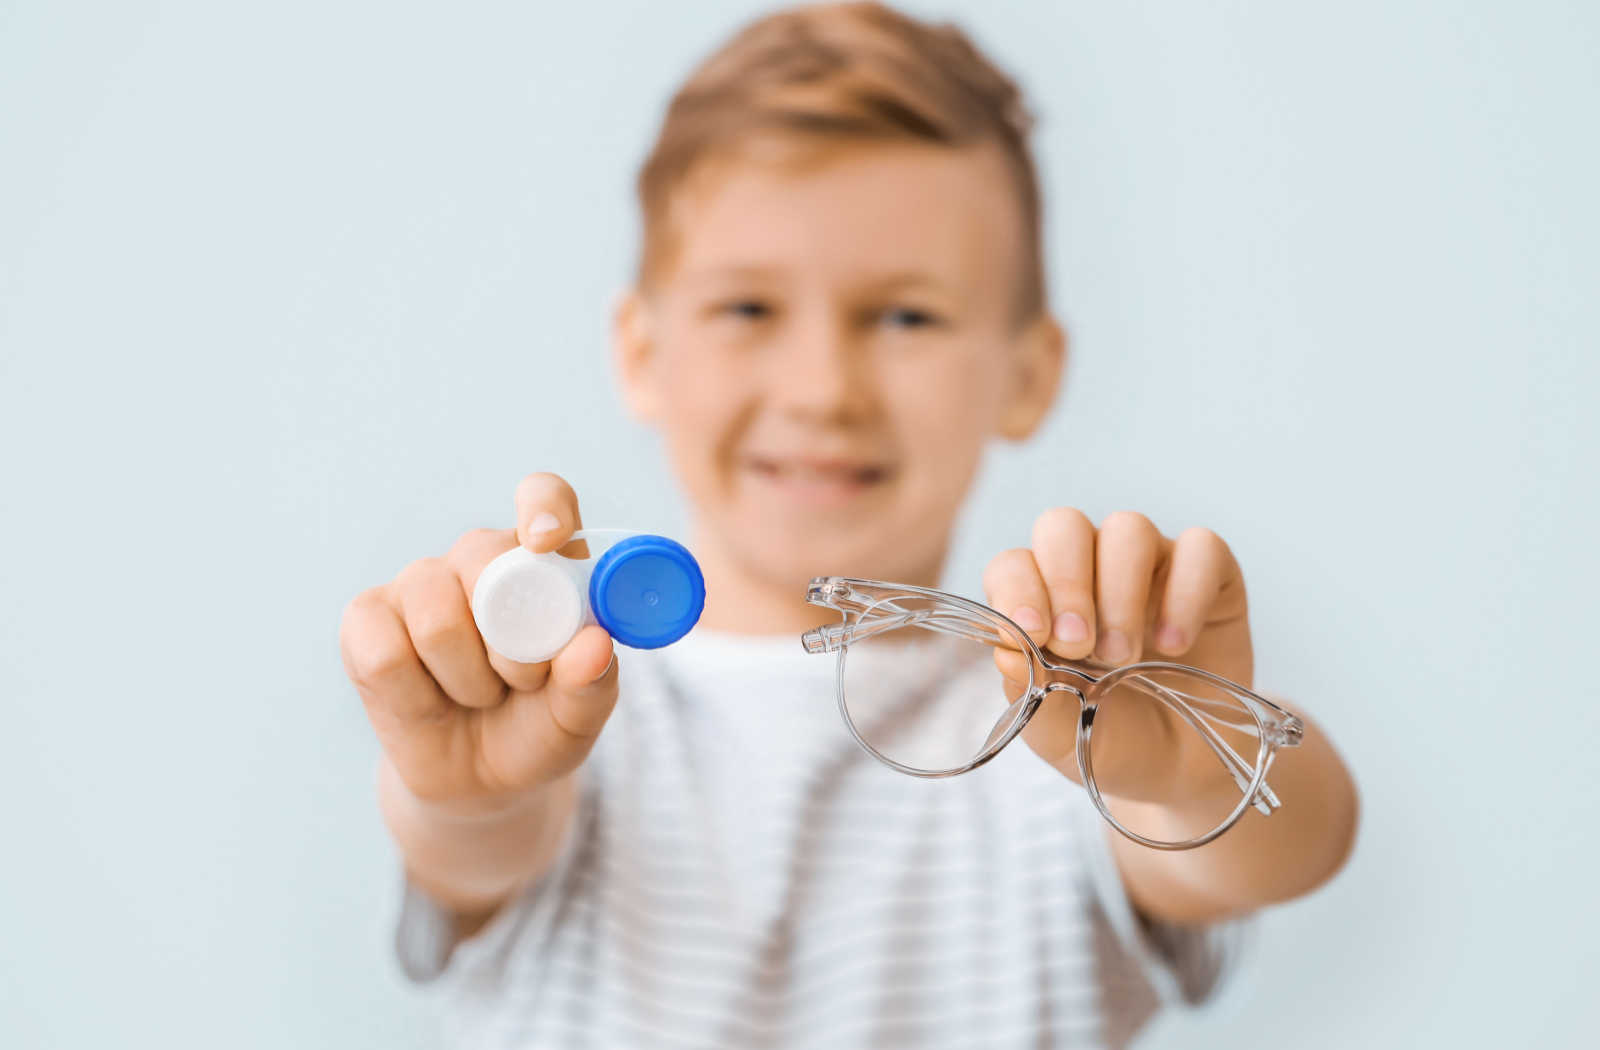 A little boy is holding and showing eyeglasses with corrective lenses and specially designed contact lenses for his myopia